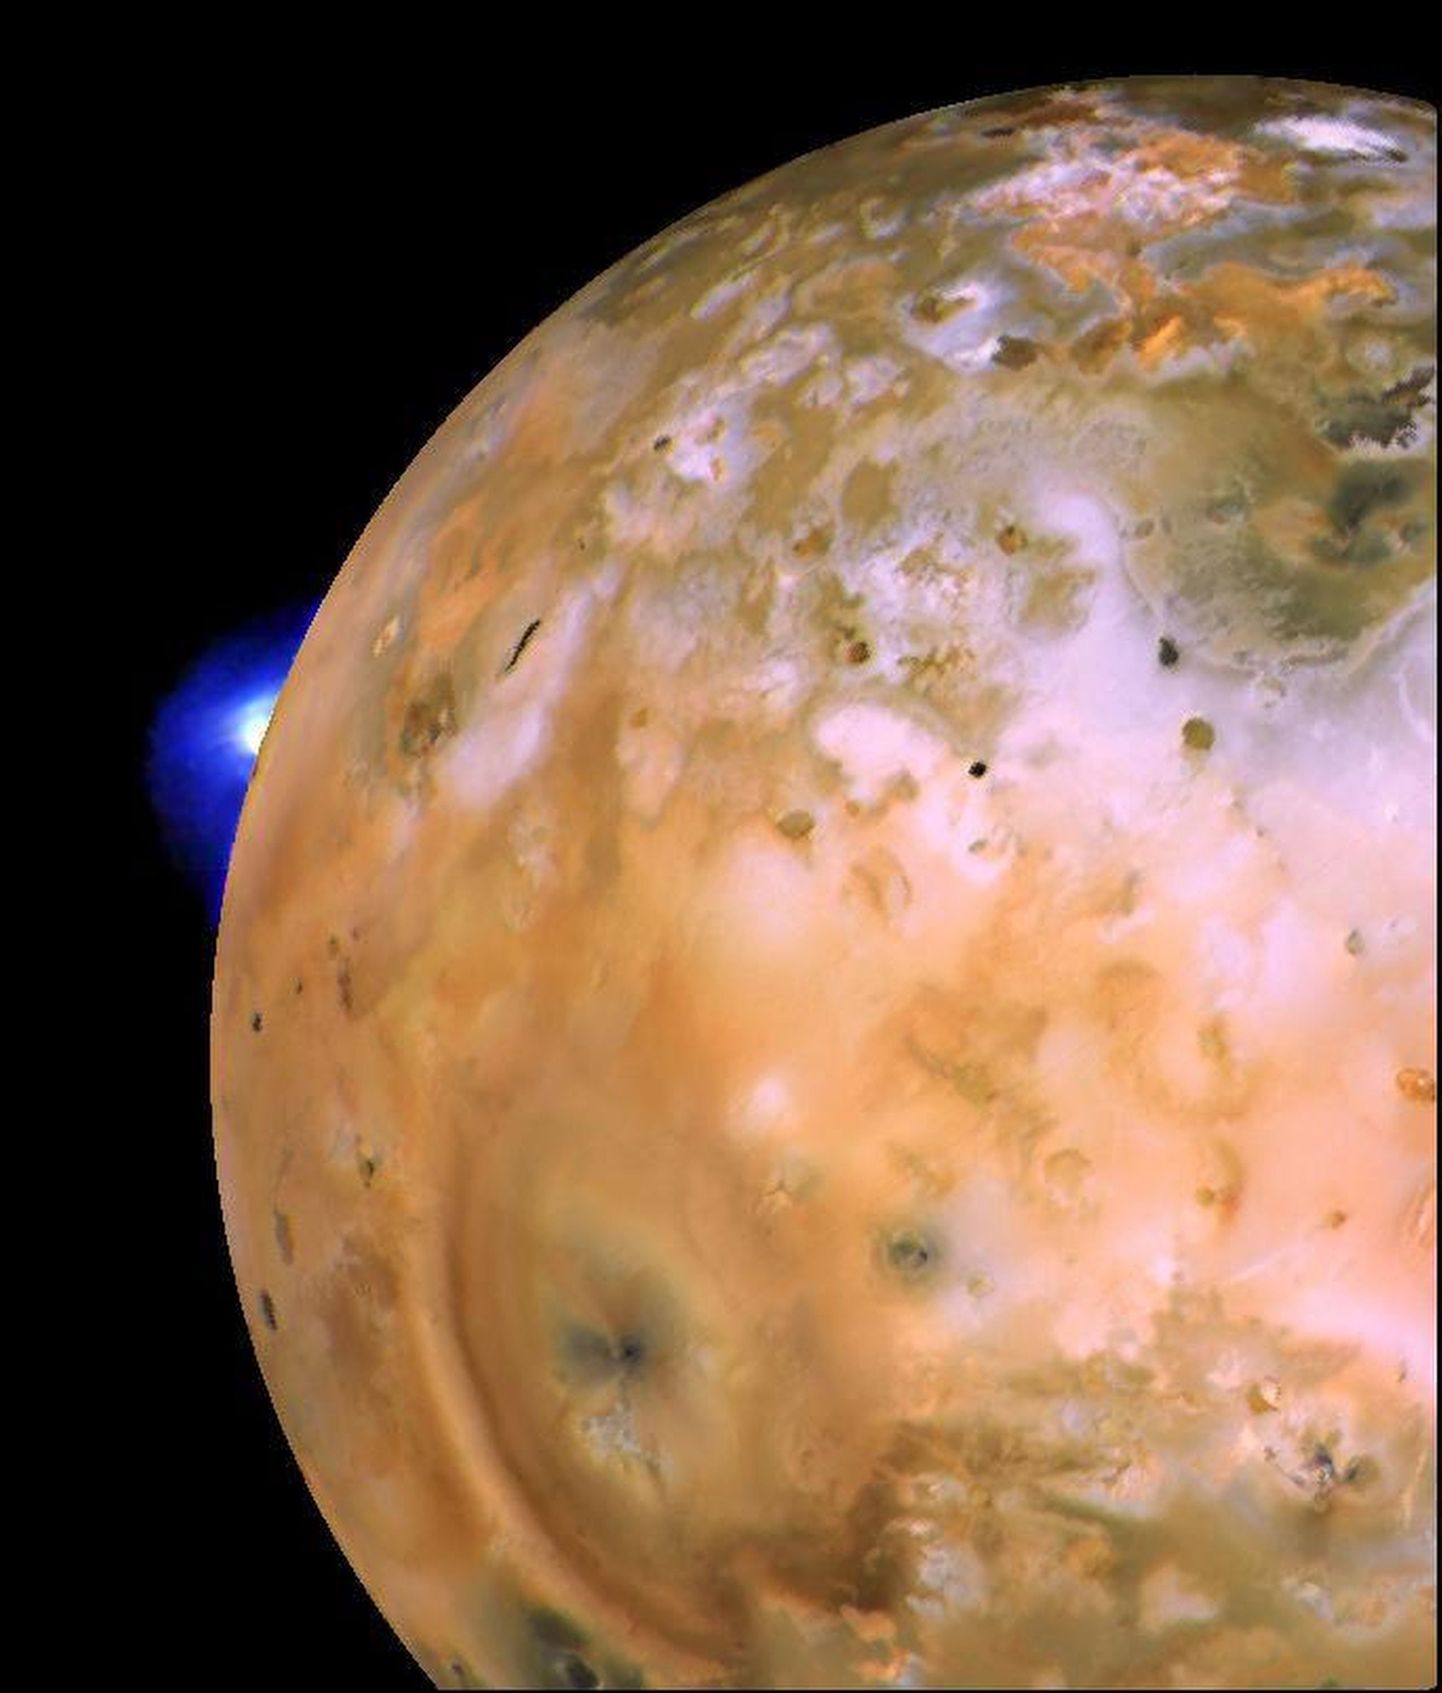 This image provided by NASA shows an image taken by the Voyager 1 spacecraft showing a volcanic plume on the Jupiter moon Io. Launched in 1977, the twin spacecraft are exploring the edge of the solar system. Voyager 1 is poised to cross into interstellar space. (AP Photo/NASA) / SCANPIX Code: 436